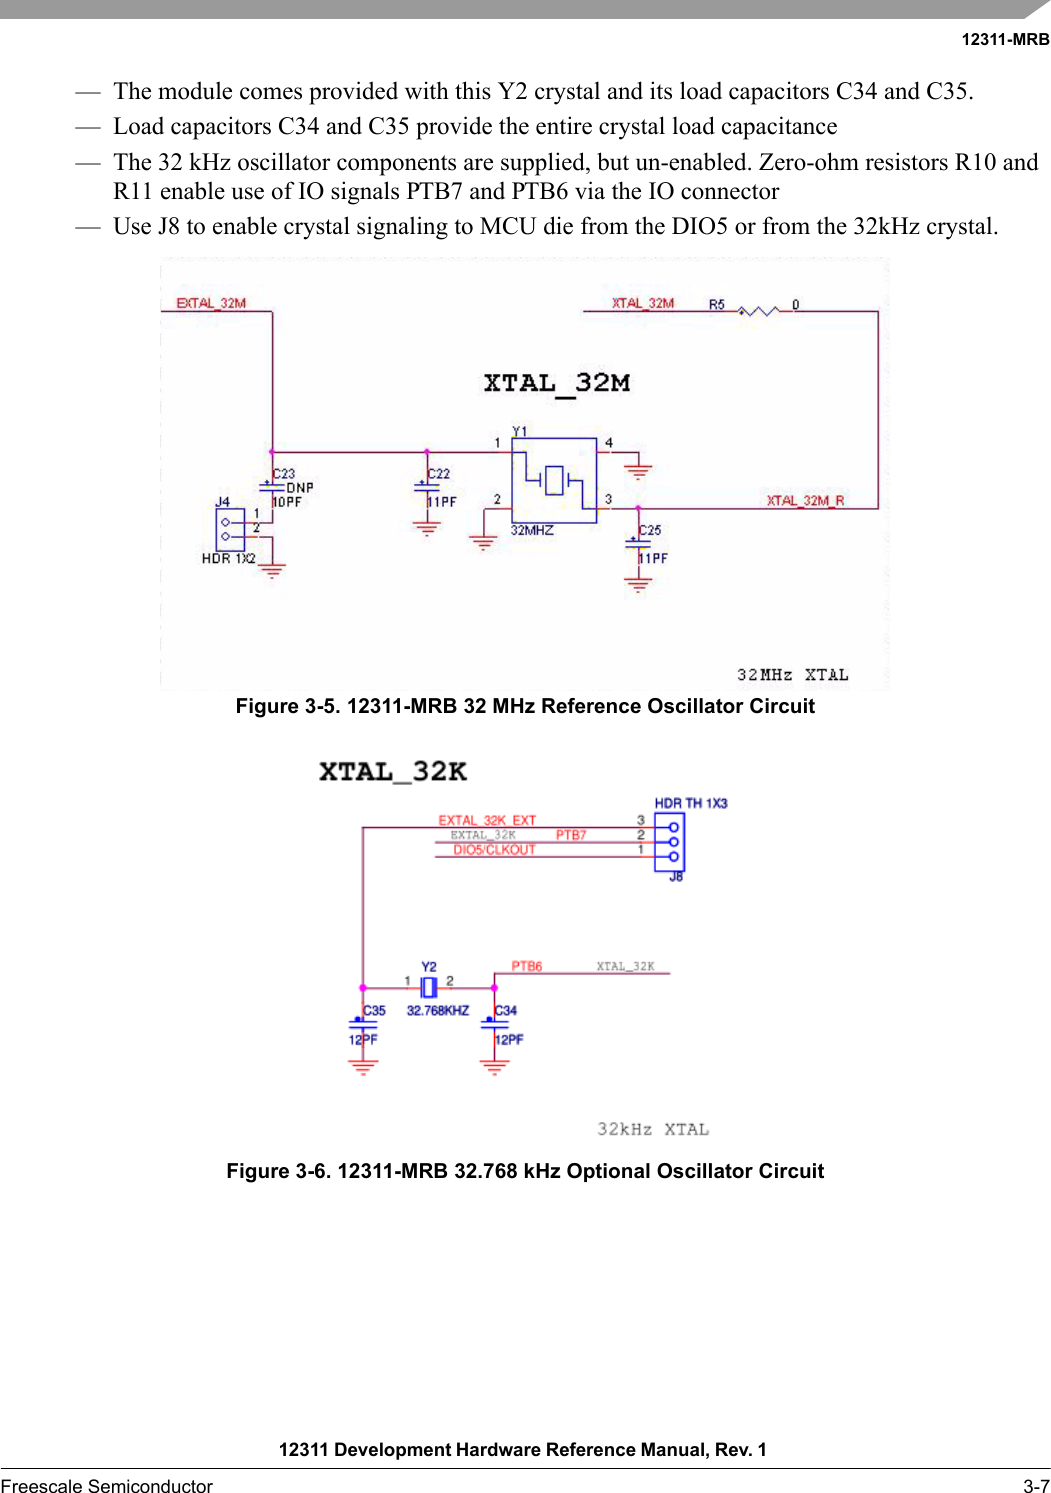 12311-MRB12311 Development Hardware Reference Manual, Rev. 1 Freescale Semiconductor 3-7— The module comes provided with this Y2 crystal and its load capacitors C34 and C35.— Load capacitors C34 and C35 provide the entire crystal load capacitance— The 32 kHz oscillator components are supplied, but un-enabled. Zero-ohm resistors R10 and R11 enable use of IO signals PTB7 and PTB6 via the IO connector— Use J8 to enable crystal signaling to MCU die from the DIO5 or from the 32kHz crystal.Figure 3-5. 12311-MRB 32 MHz Reference Oscillator CircuitFigure 3-6. 12311-MRB 32.768 kHz Optional Oscillator Circuit